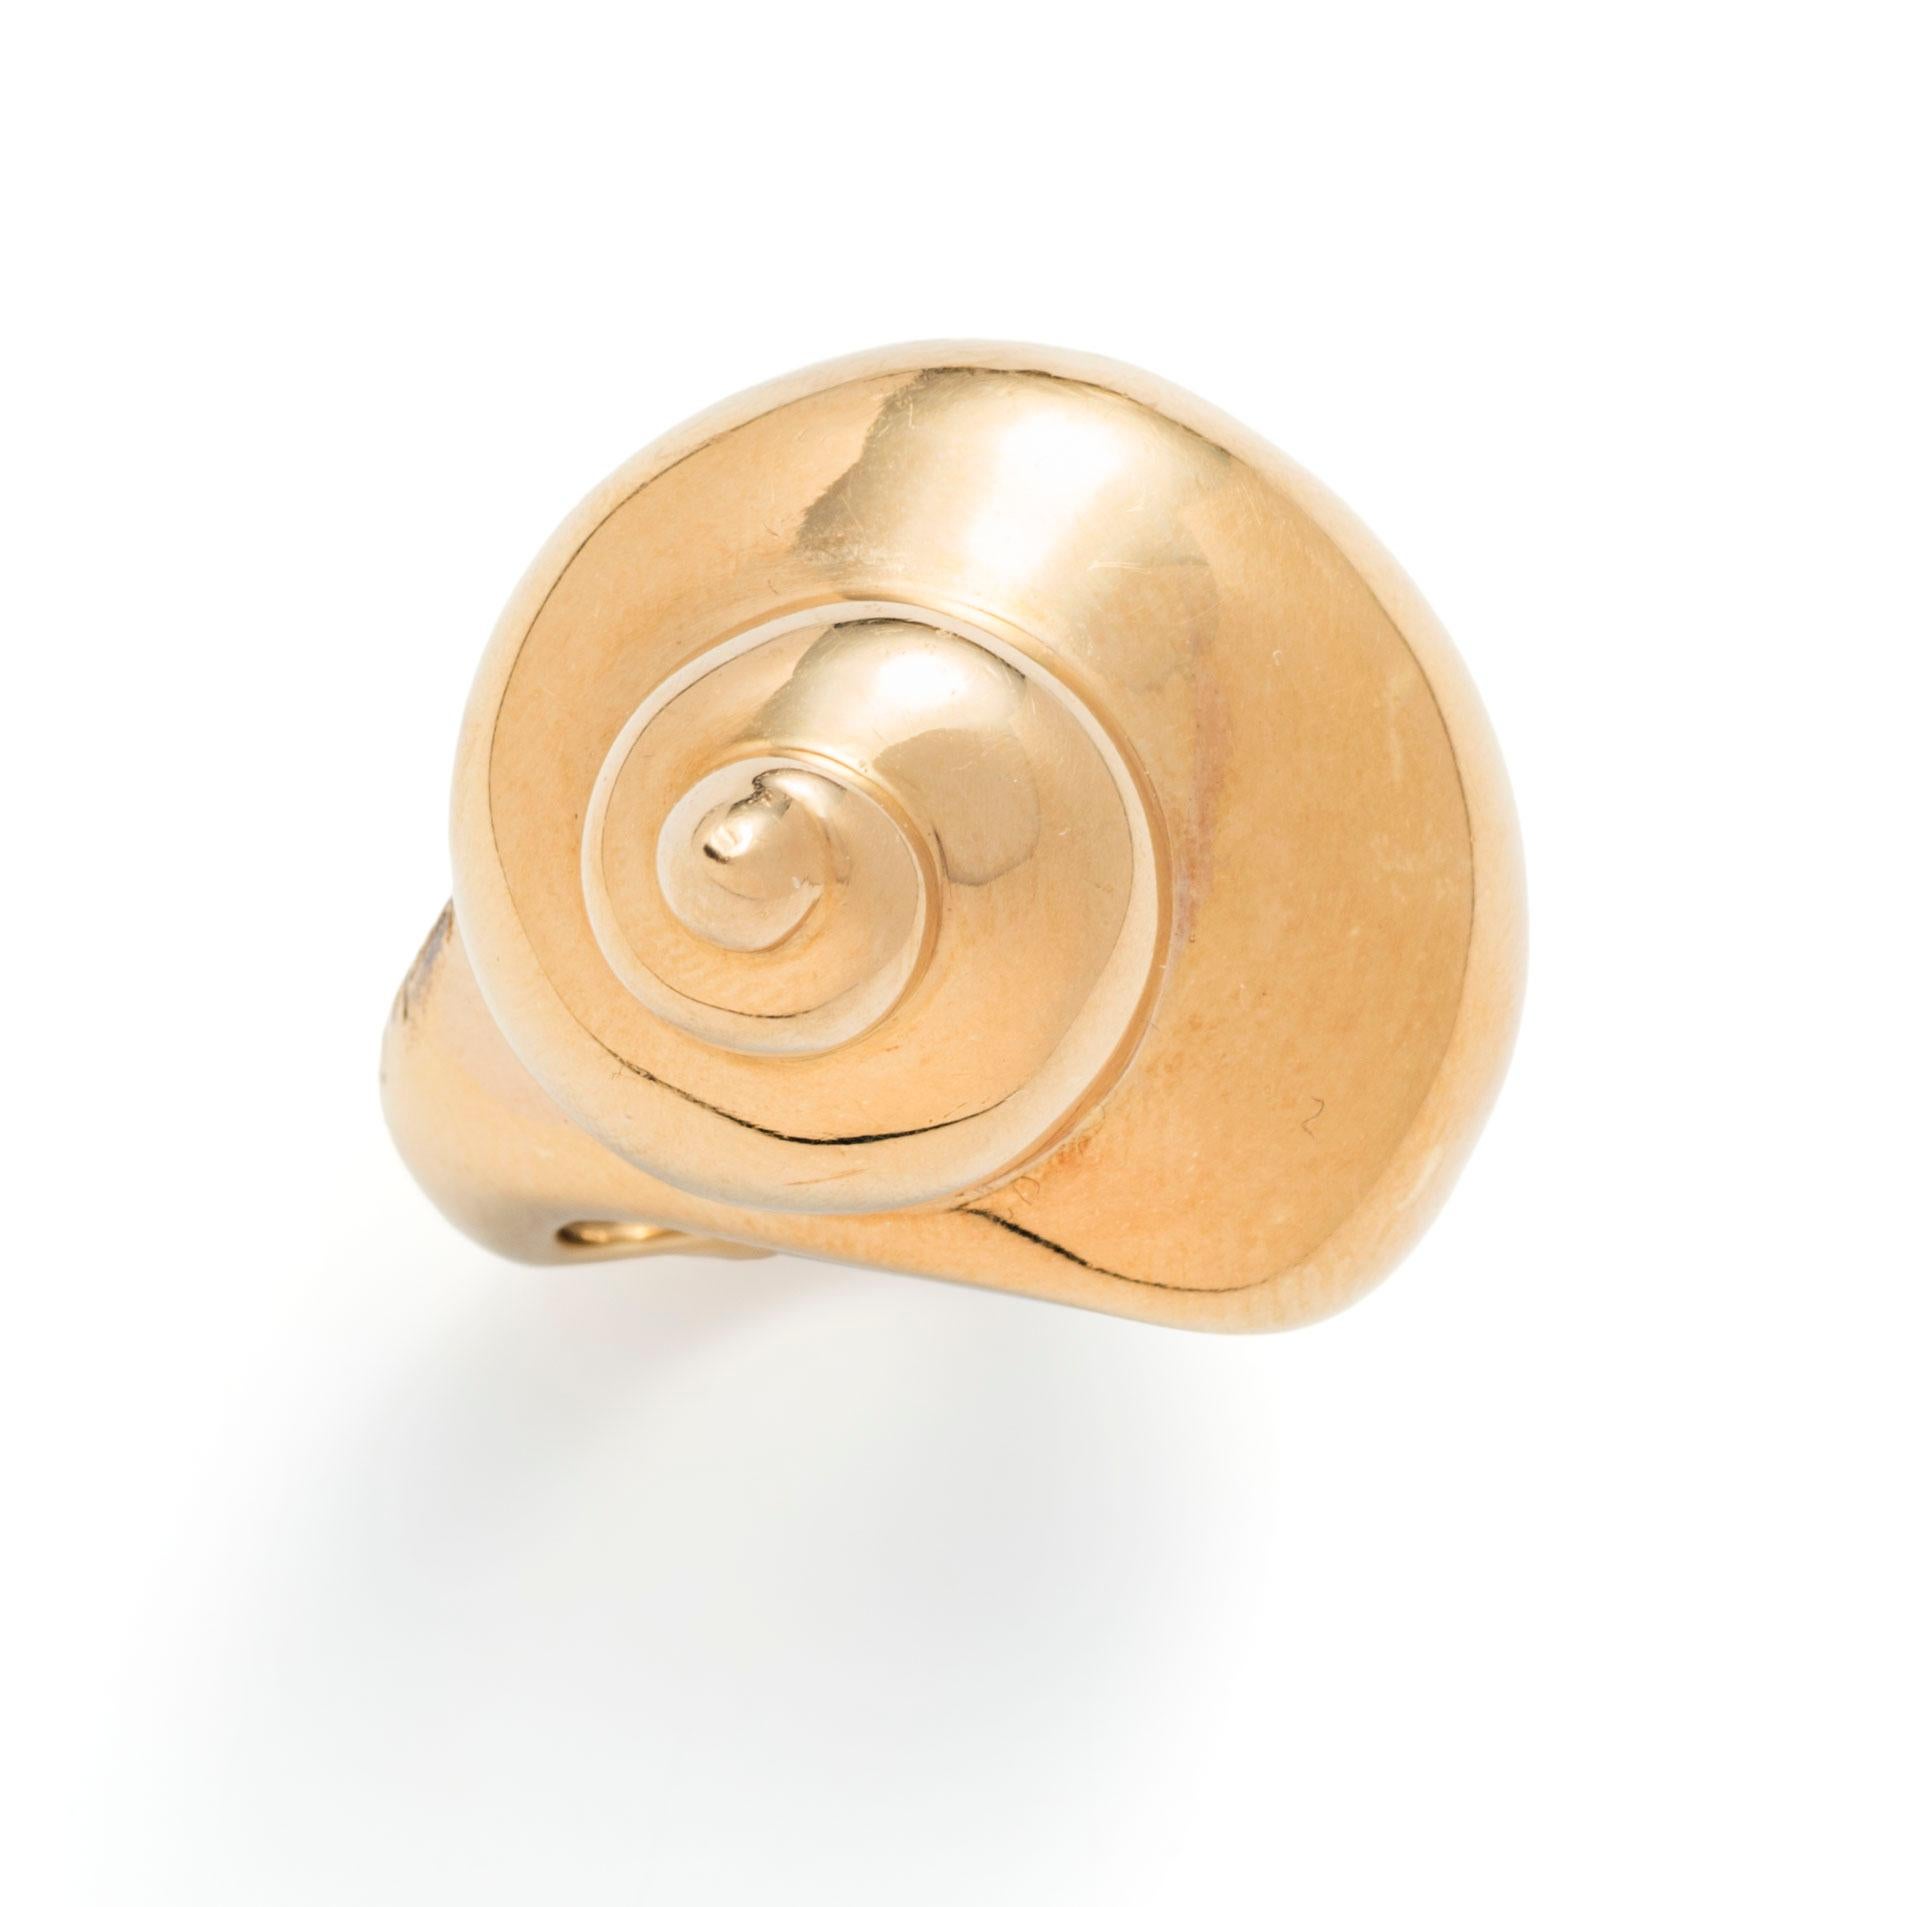 Angela Cummings began designing for Tiffany & Co. in 1968 under the direction of Donald Claflin. Her work, inspired by the organic forms of natural world, was an instant hit. This dramatically scaled shell form ring is sculpted in 18k yellow gold